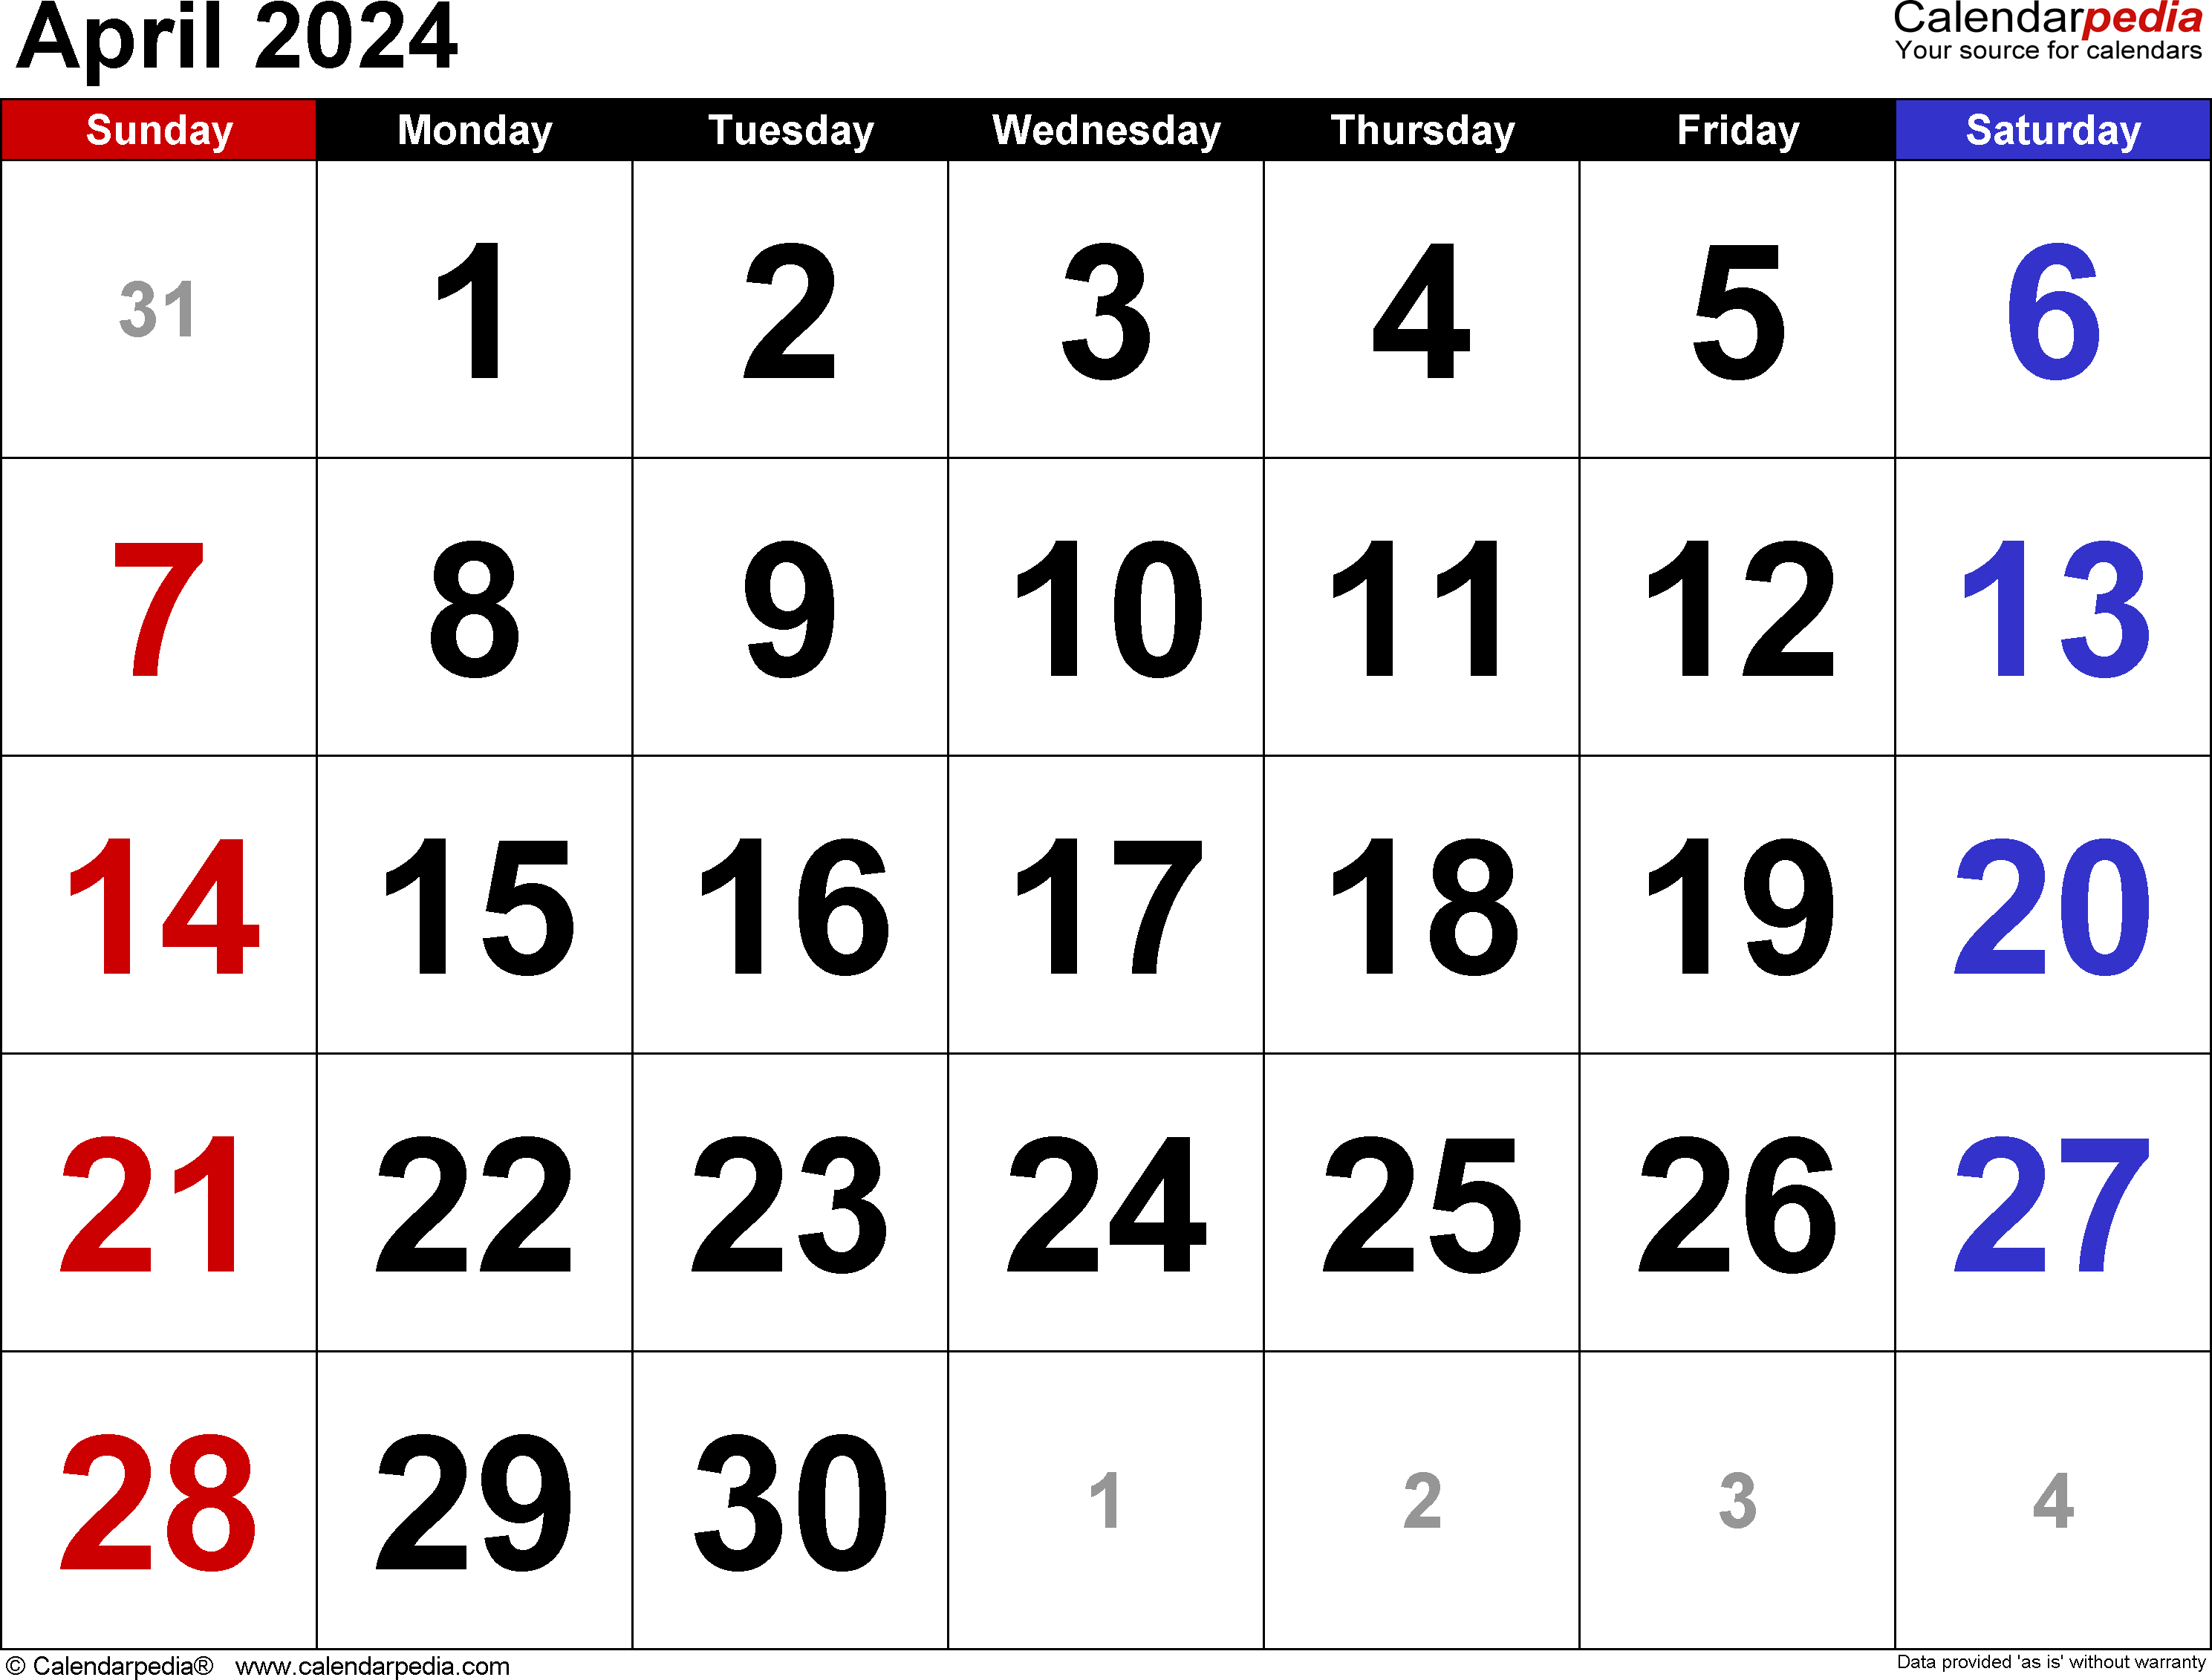 April 2024 Calendar | Templates For Word, Excel And Pdf in Show Me The Calendar For April 2024